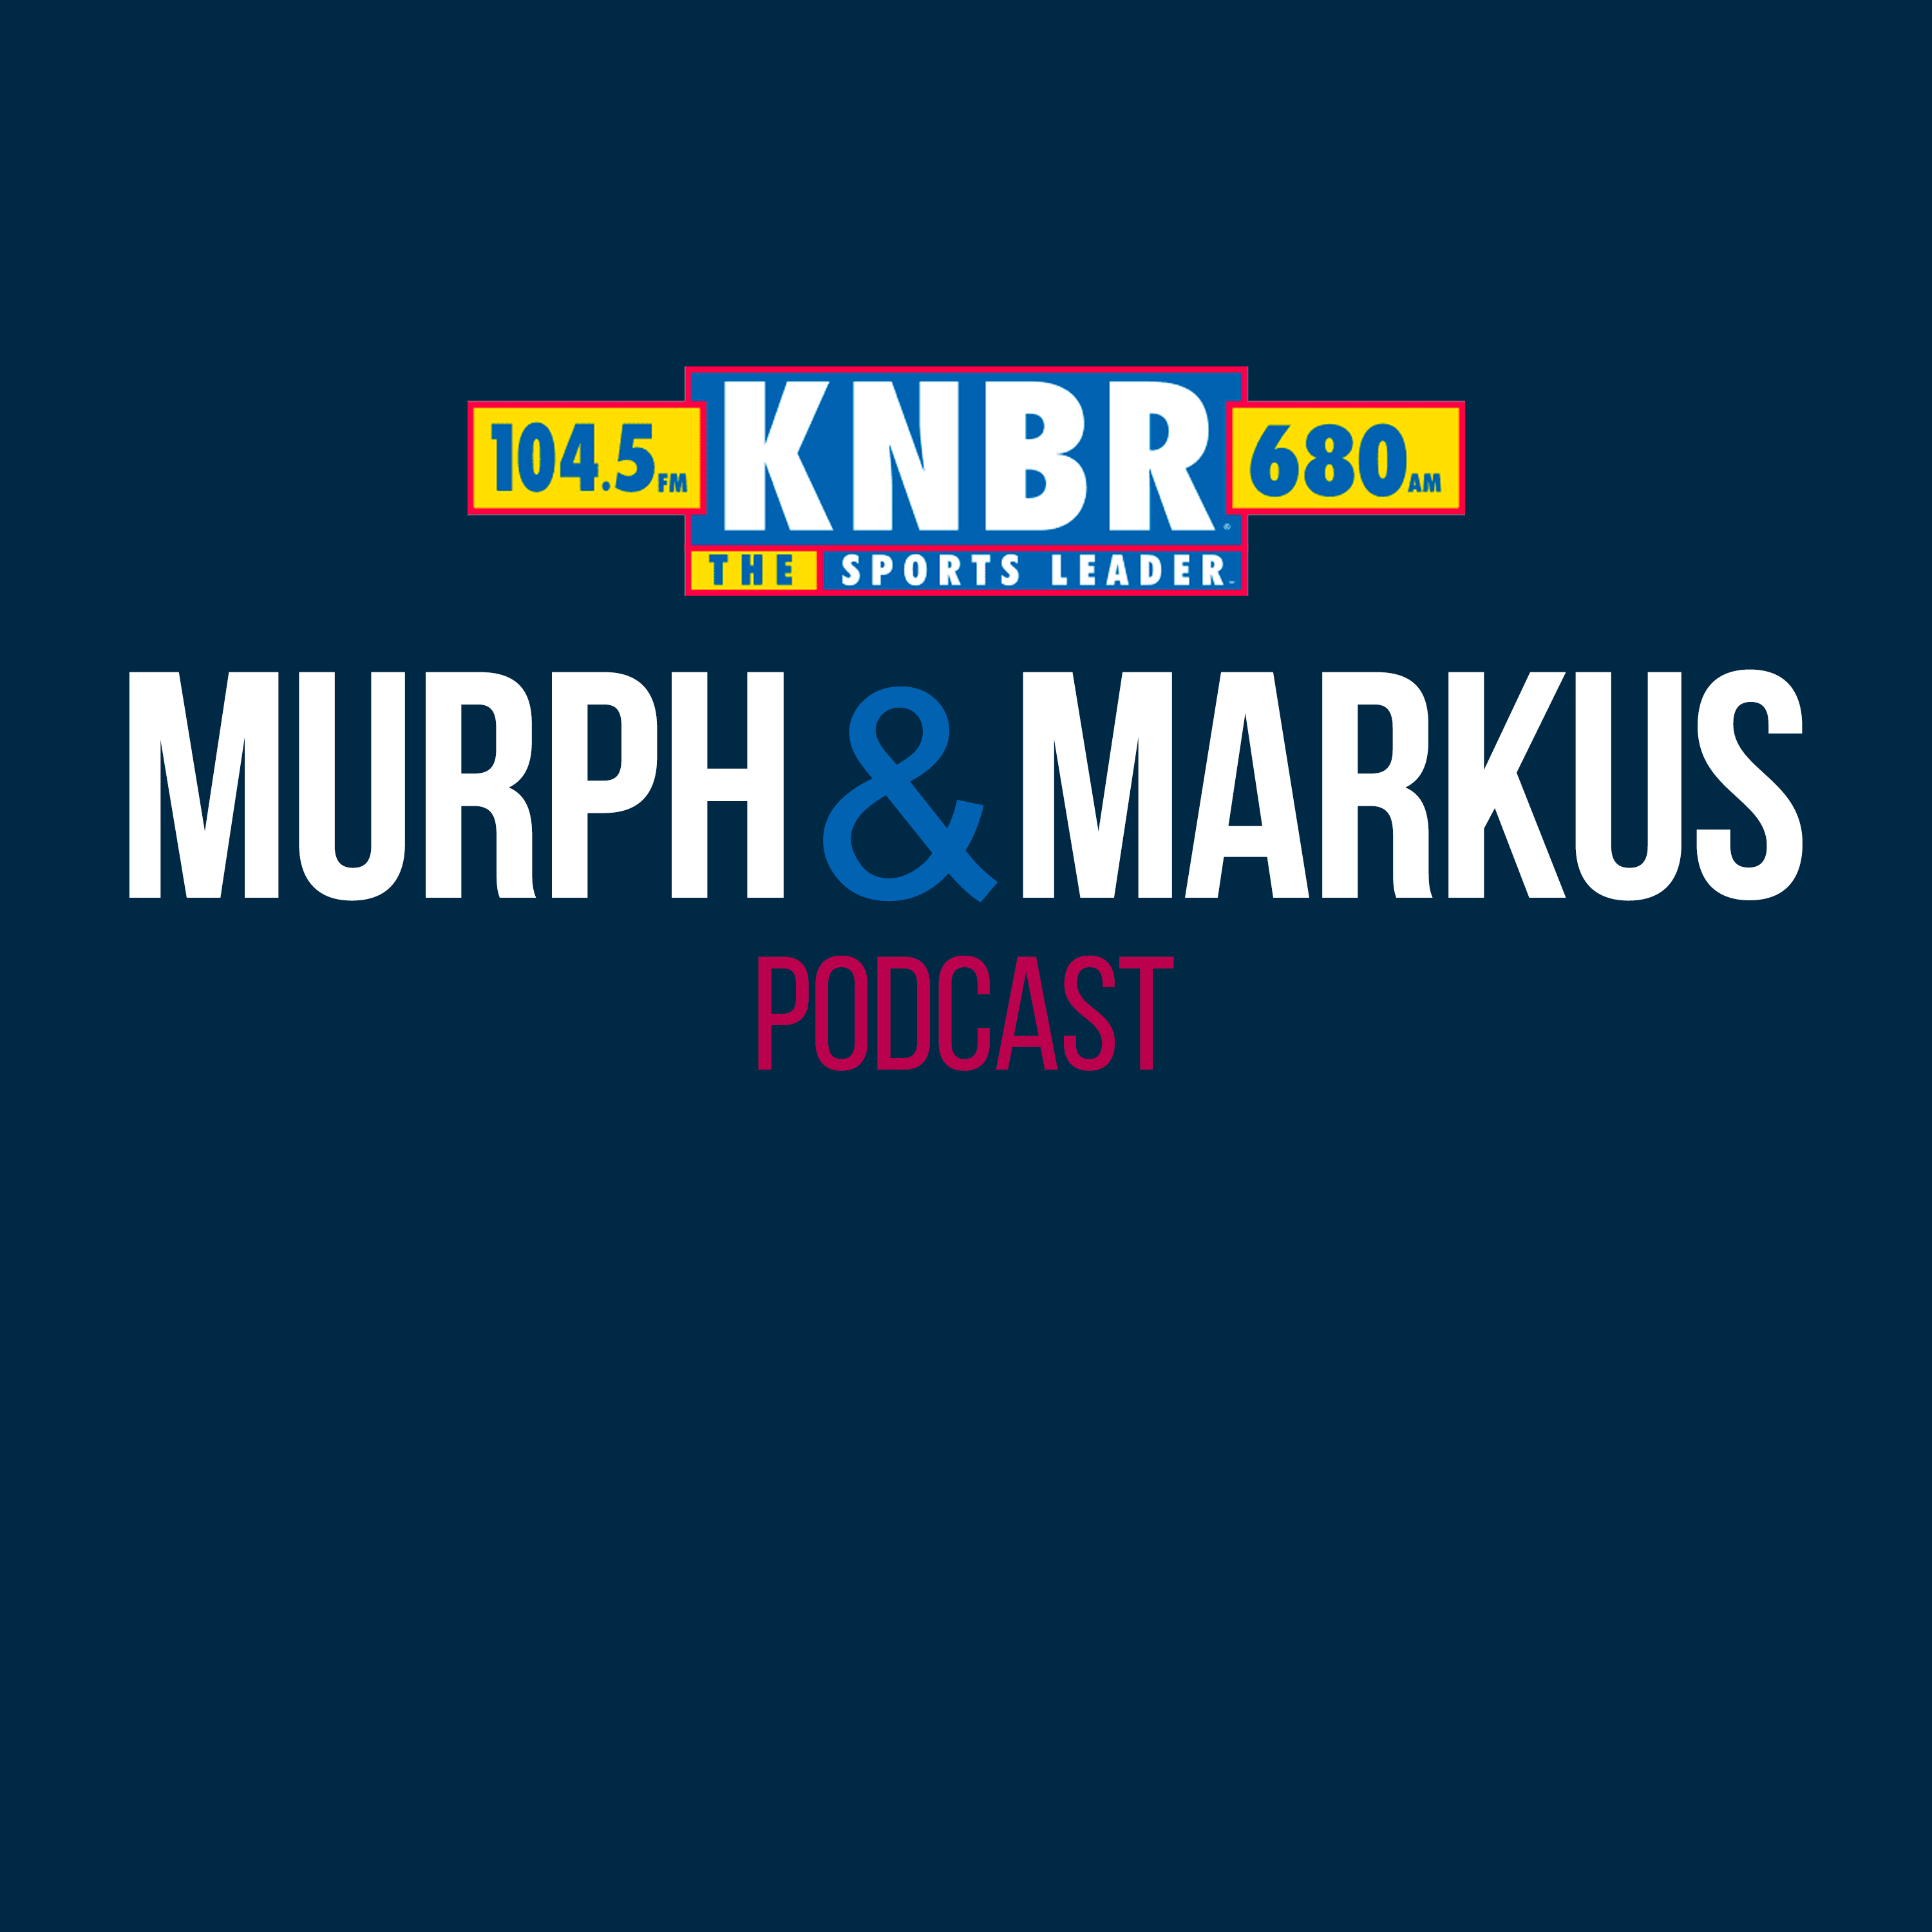 5-23 Hour 1: Murph & Markus talk to LaMonte Wade Jr., react to some of the best calls from the game last night, and recap the game of the year